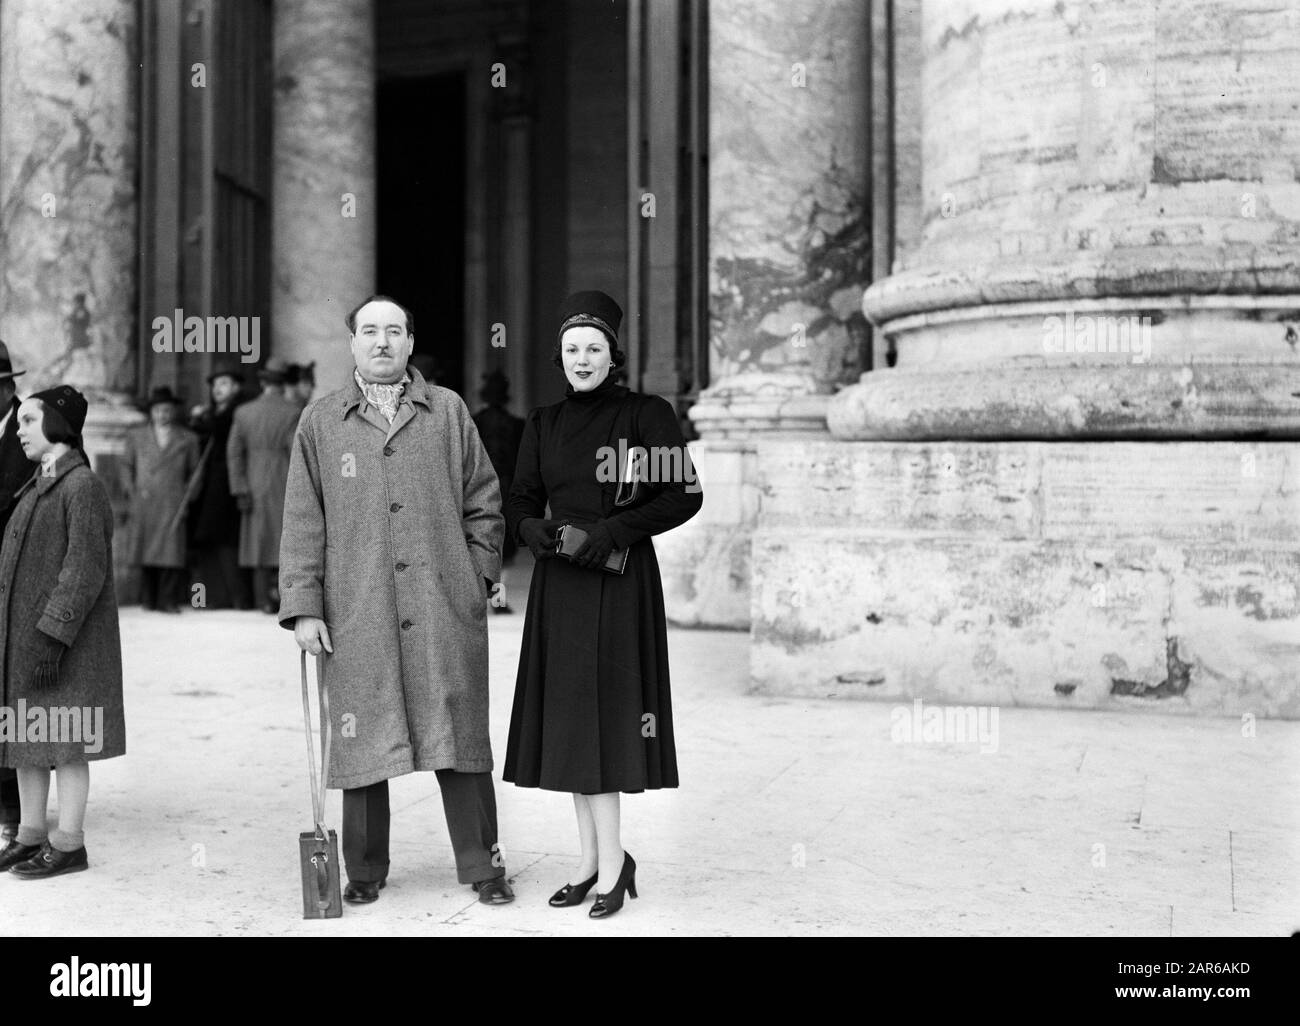 Rome: Visit to Vatican City Lee Garmes and his wife in front of the  entrance to St. Peter's Basilica Date: December 1937 Location: Italy, Rome,  Vatican City Keywords: church buildings, men, pillars,